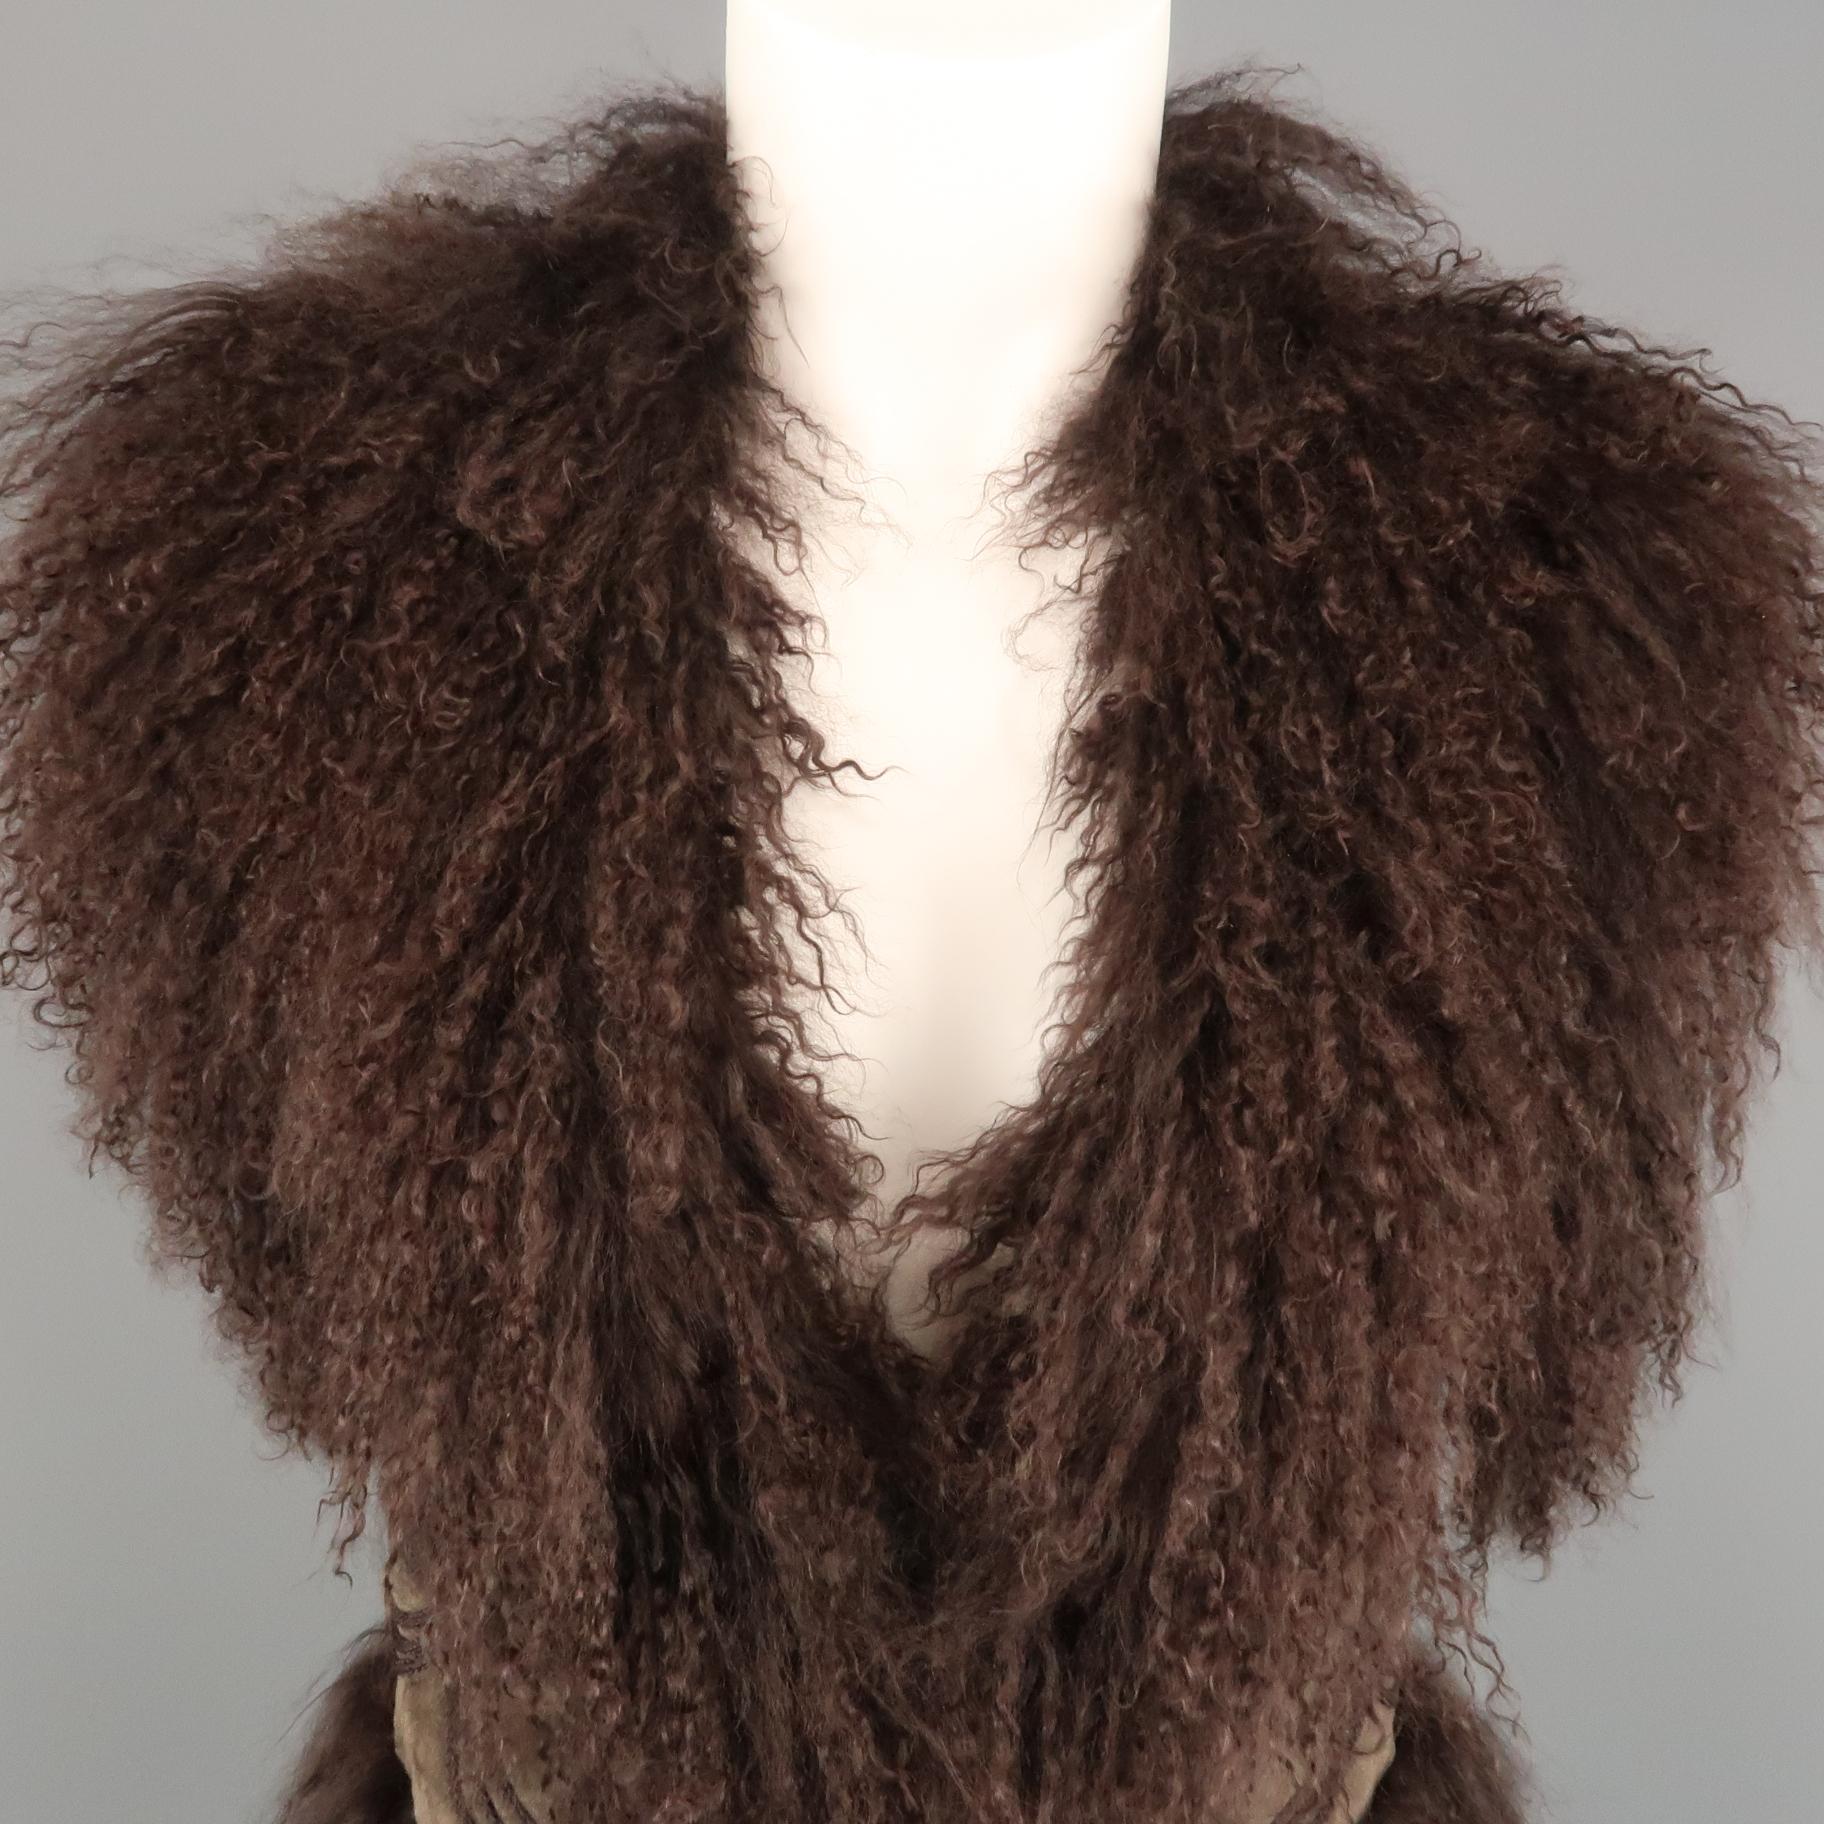 BELA vest comes in olive green suede with embroidery and full brown Mongolian curly lamb fur liner collar, and trim.
 
Very Good Pre-Owned Condition.
Marked: XS
 
Measurements:
 
Shoulder: 13 in.
Bust: 34 in.
Length: 23 in.